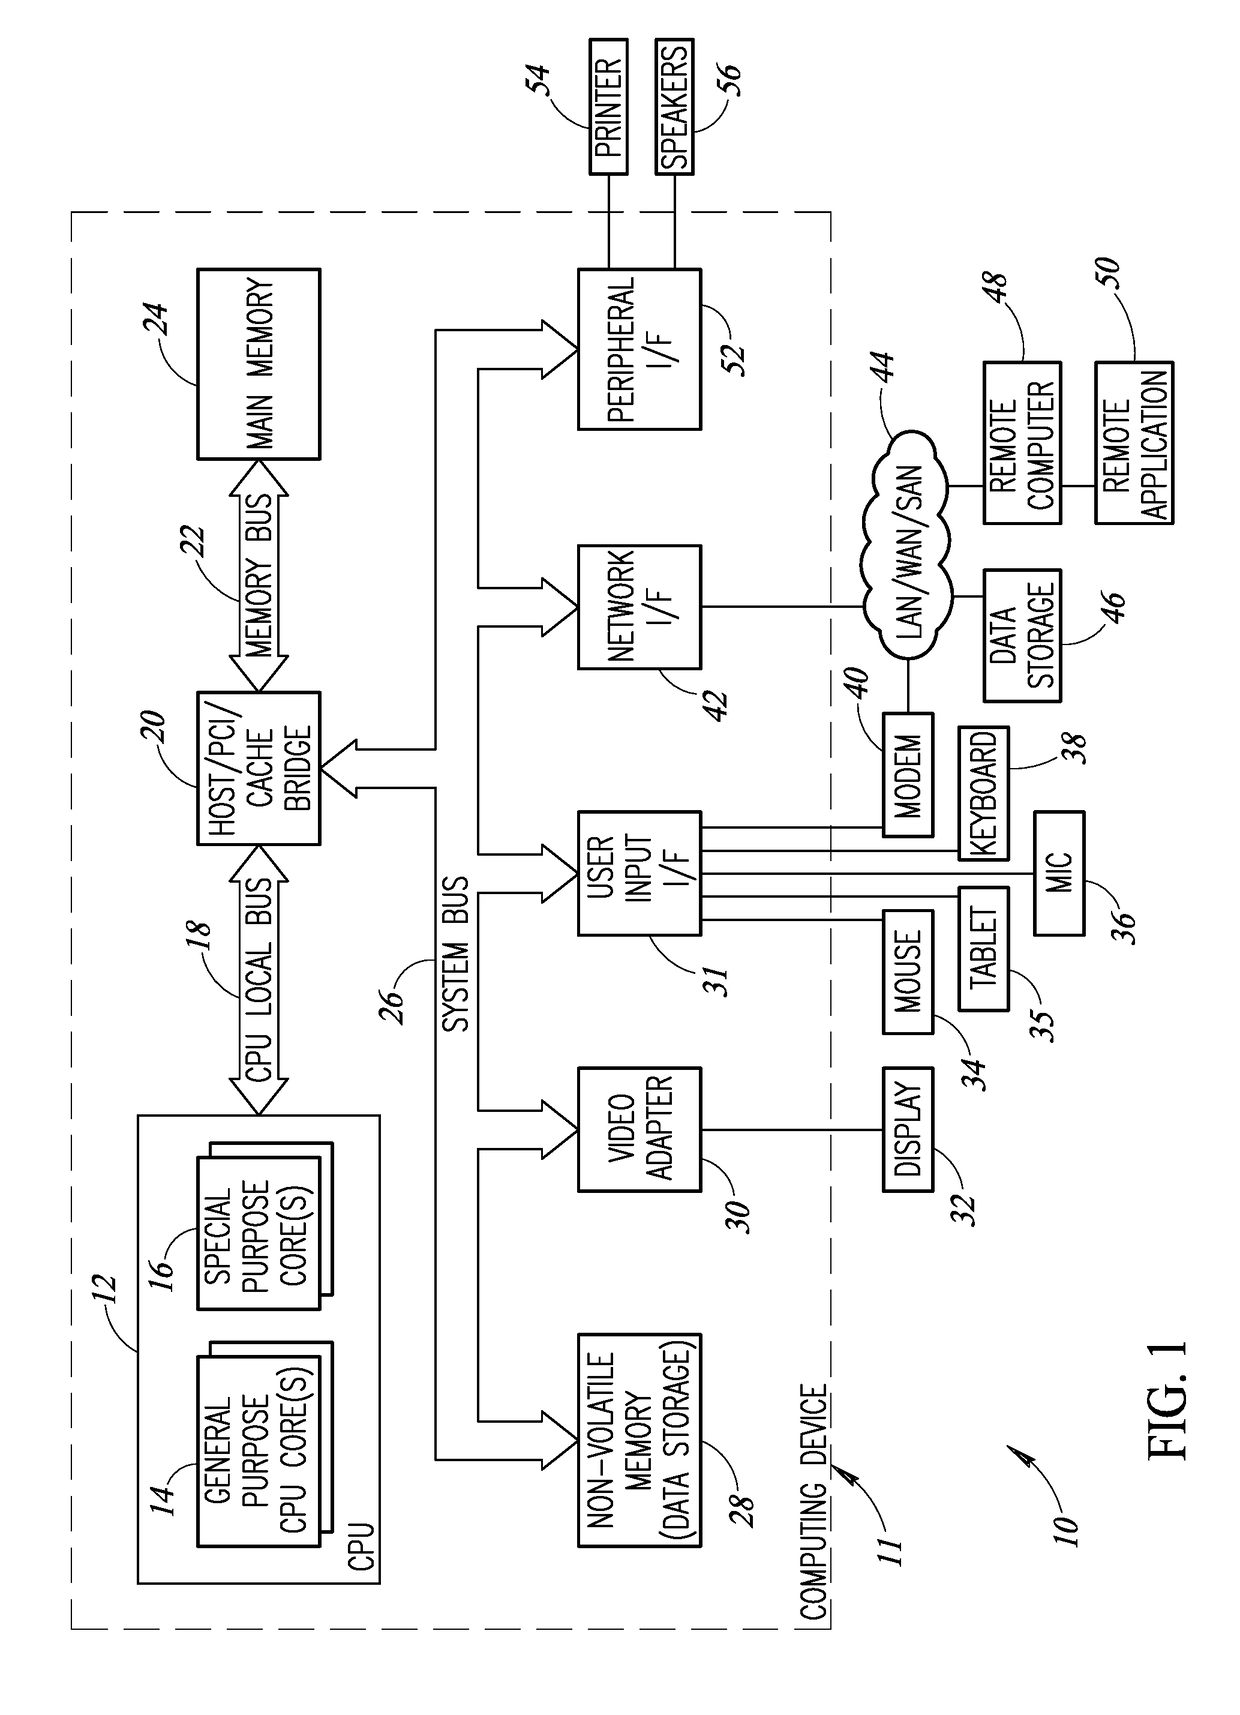 Neural Network Processor Incorporating Multi-Level Hierarchical Aggregated Computing And Memory Elements